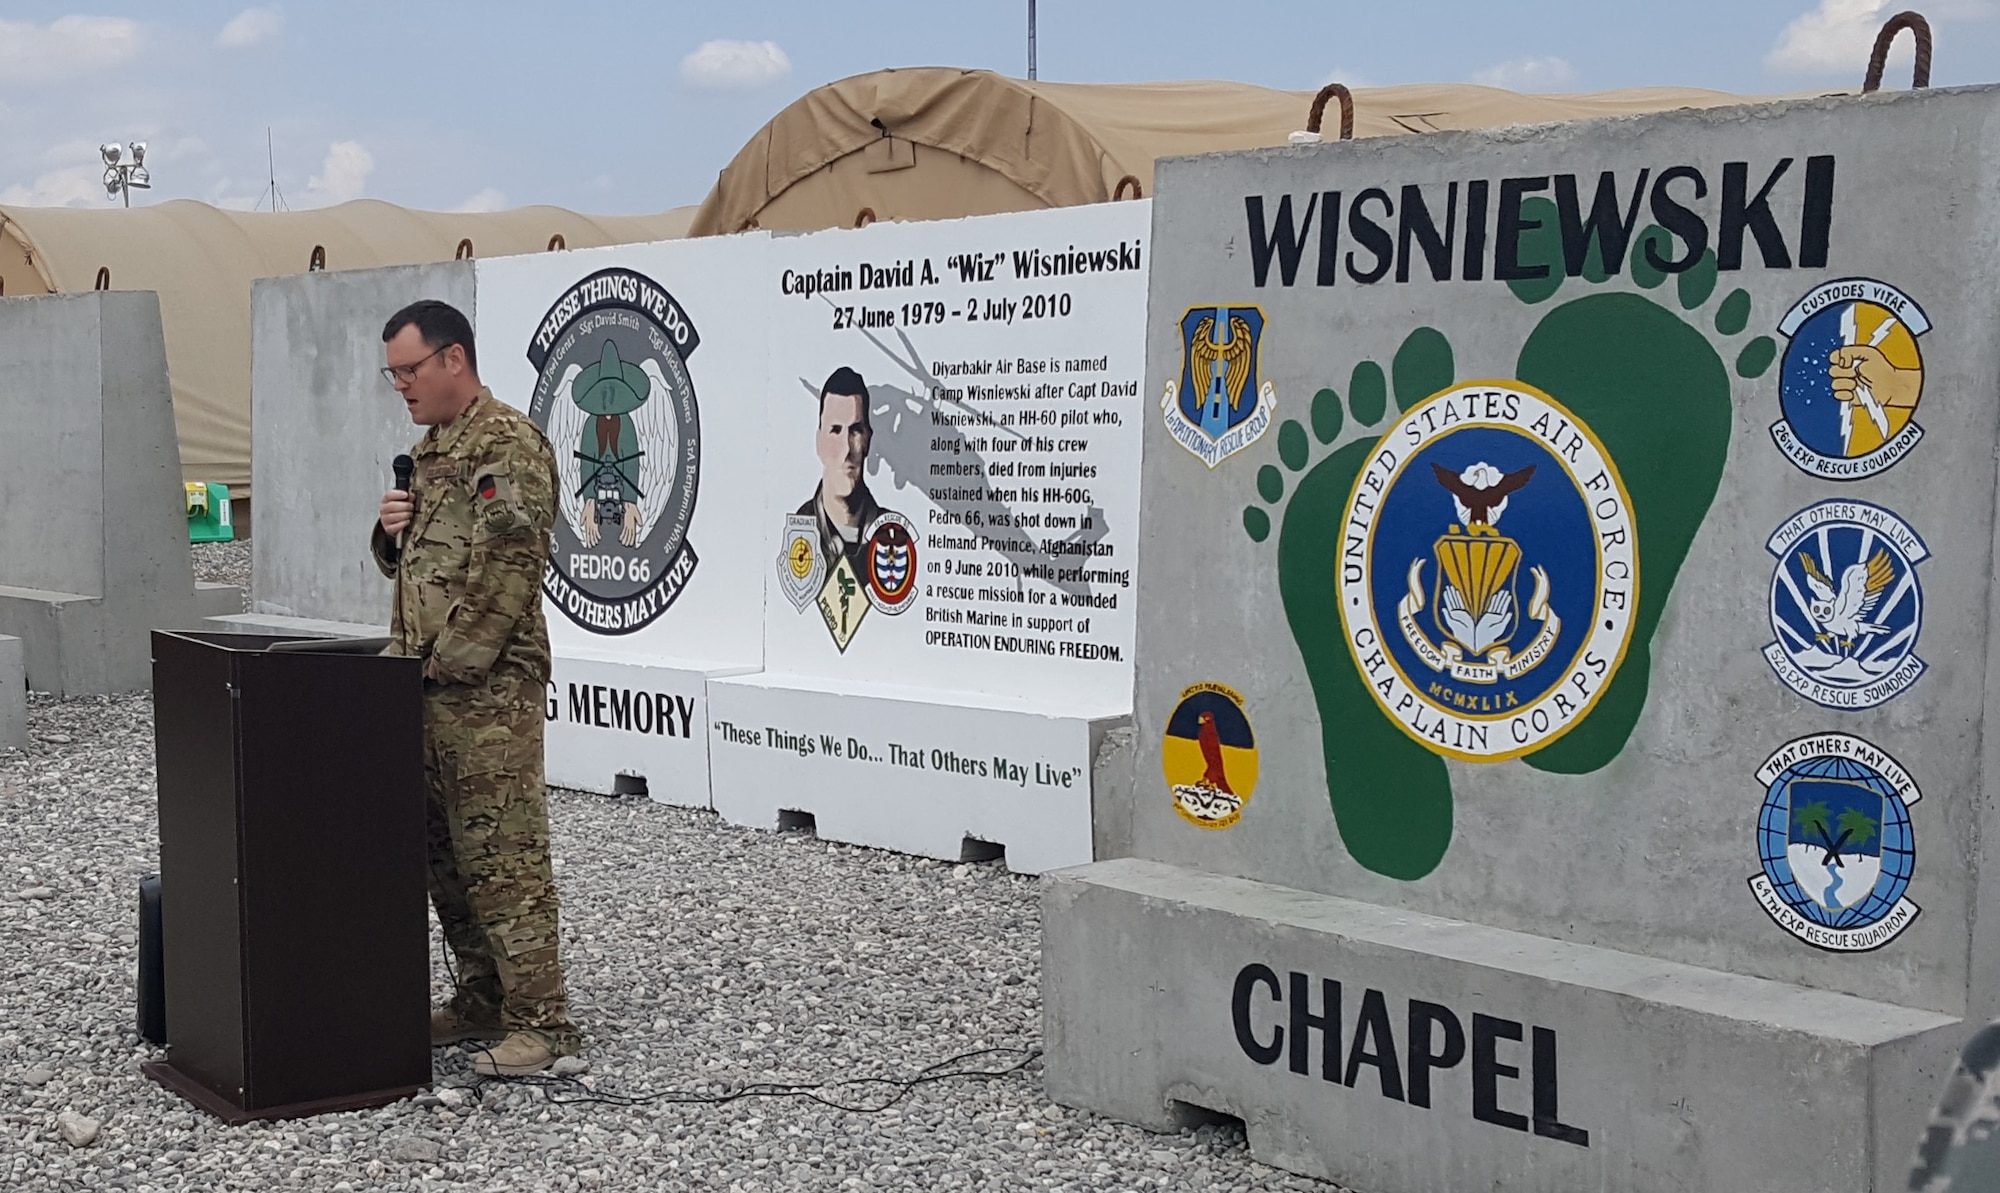 U.S. service members hold a Chapel Dedication Ceremony in honor of Capt. David A. “Wiz” Wisniewski, March 28, 2017, at Diyarbakir Air Base, Turkey. Wisniewski, an HH-60 Pave Hawk pilot, along with his crew, were killed in action while performing a rescue mission for a wounded British Marine in support of Operation Enduring Freedom. (Courtesy photo)